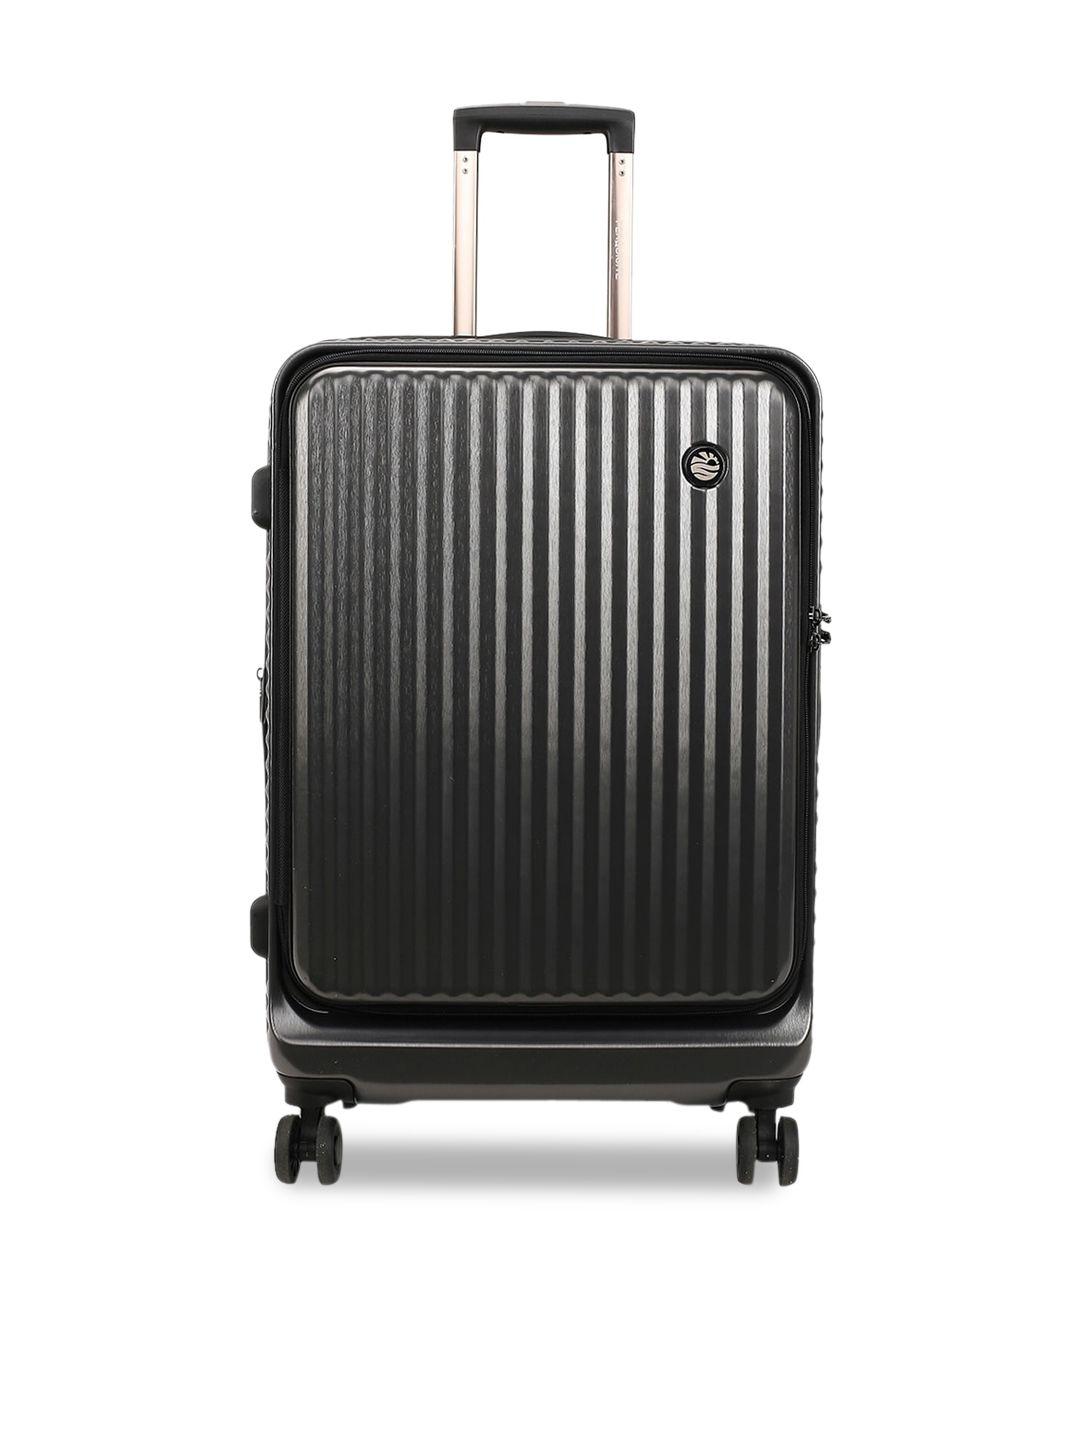 perquisite yita voyager textured hard shell medium-sized trolley suitcase